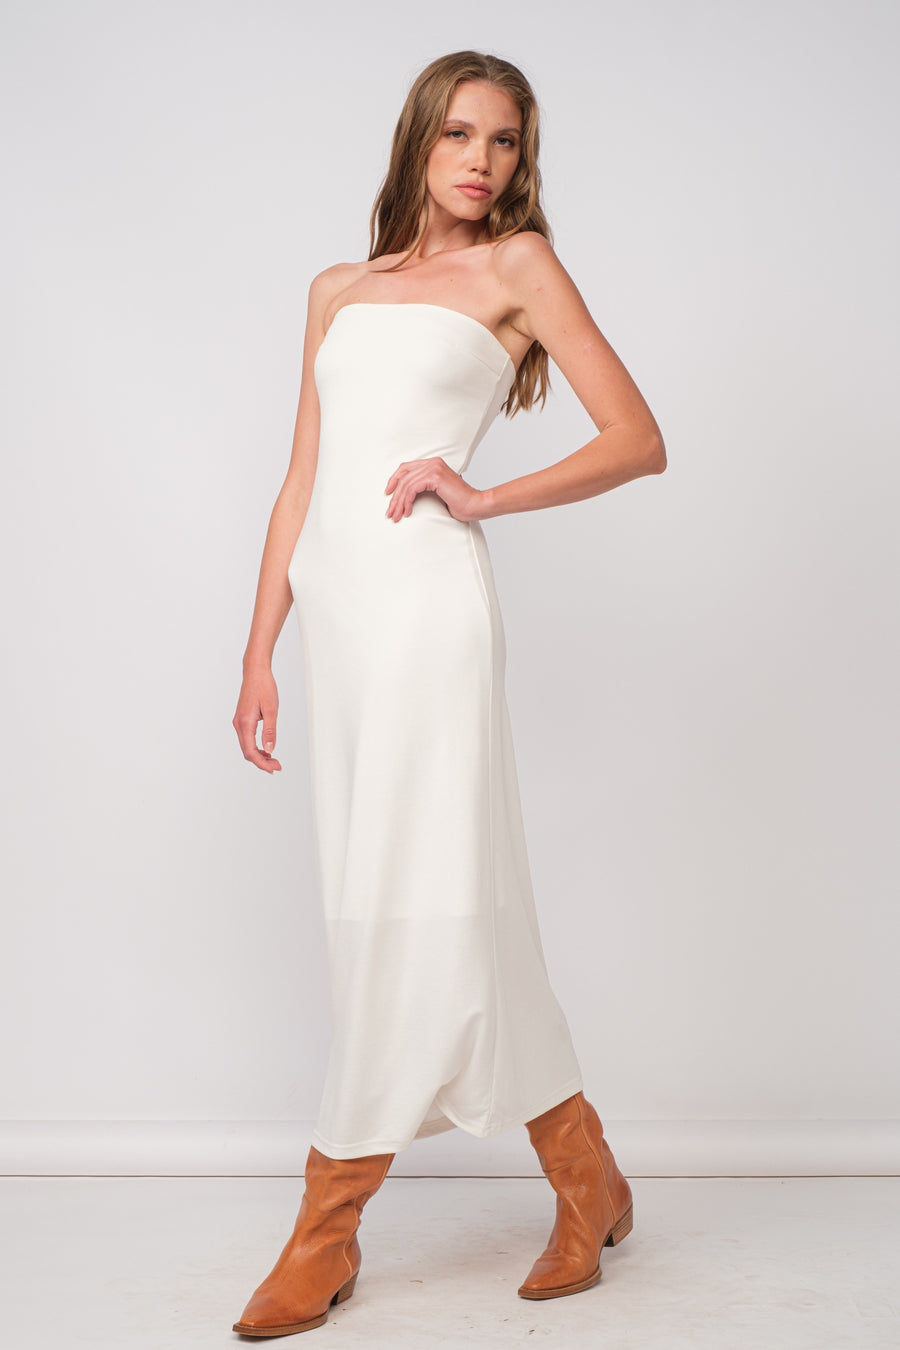 Strapless maxi dress in the color white.